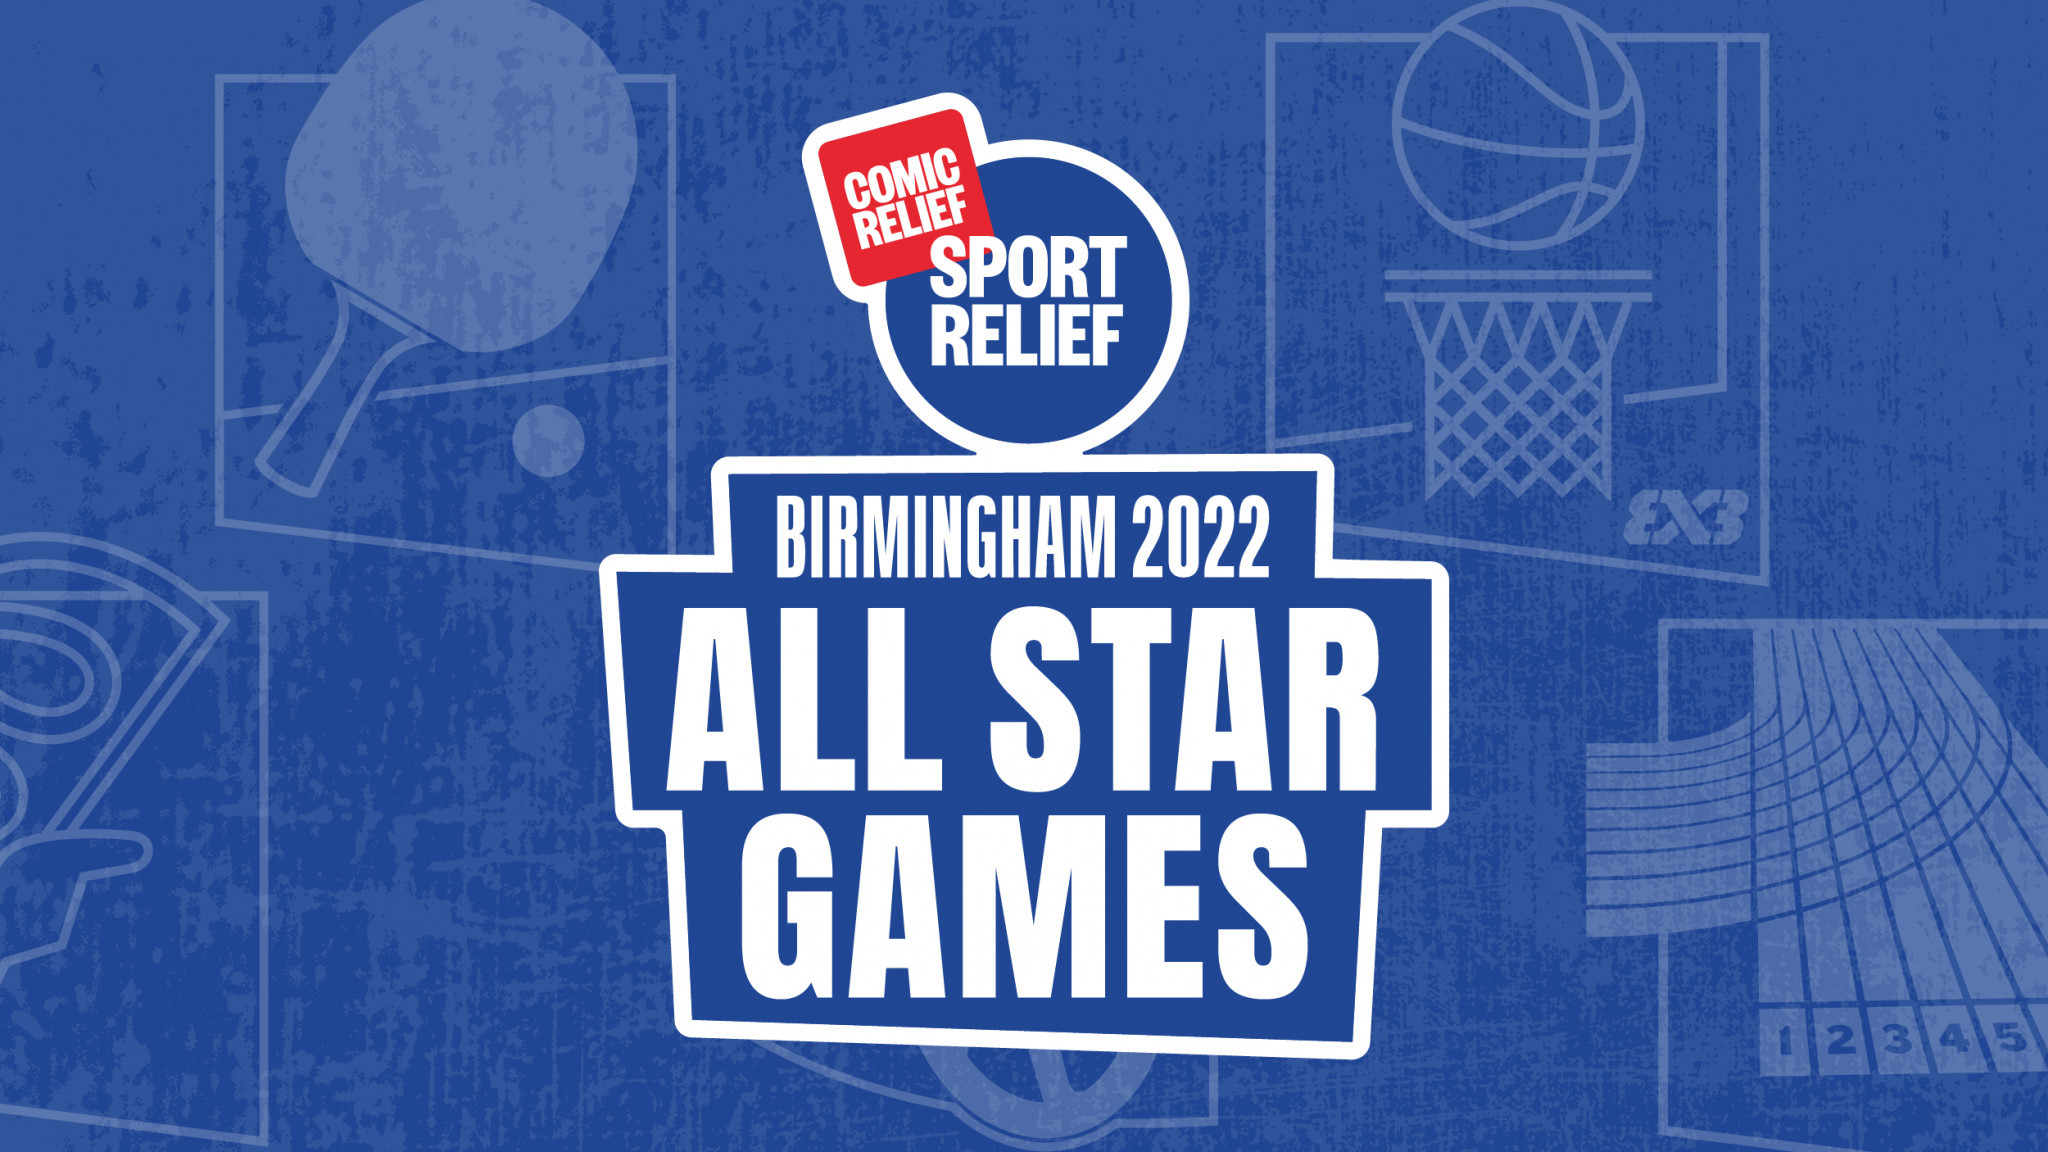 Ellie Simmonds and Kelly Holmes are set to be captains in Sport Relief All Star Games: Birmingham 2022 ©Birmingham 2022